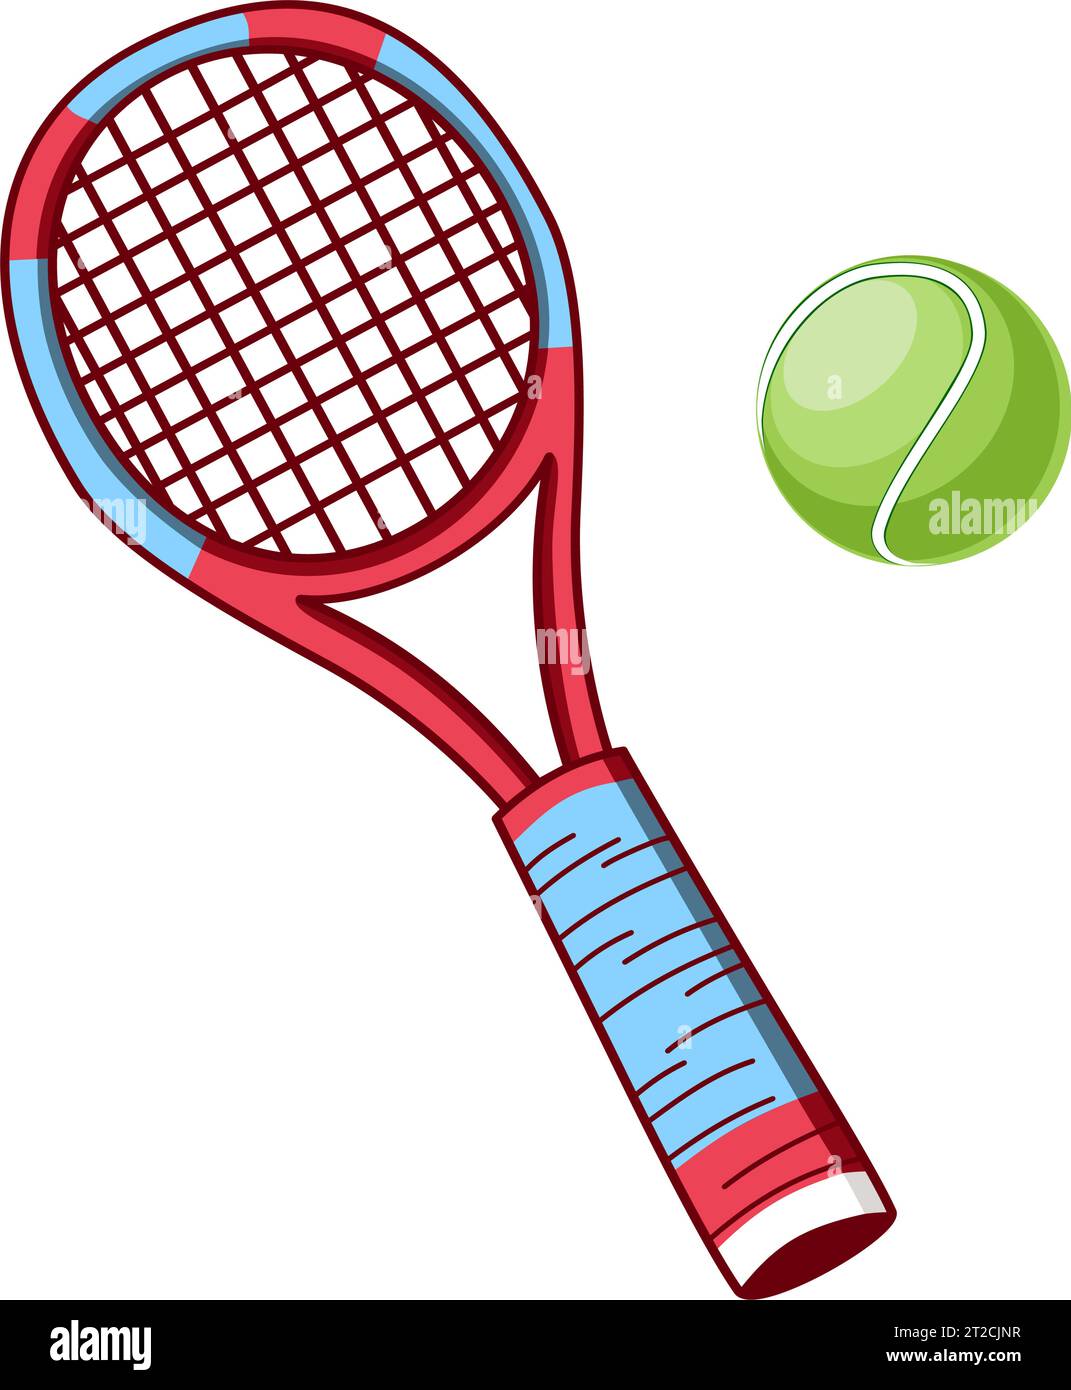 Tennis racket and ball. Vector illustration in doodle technique Stock Vector